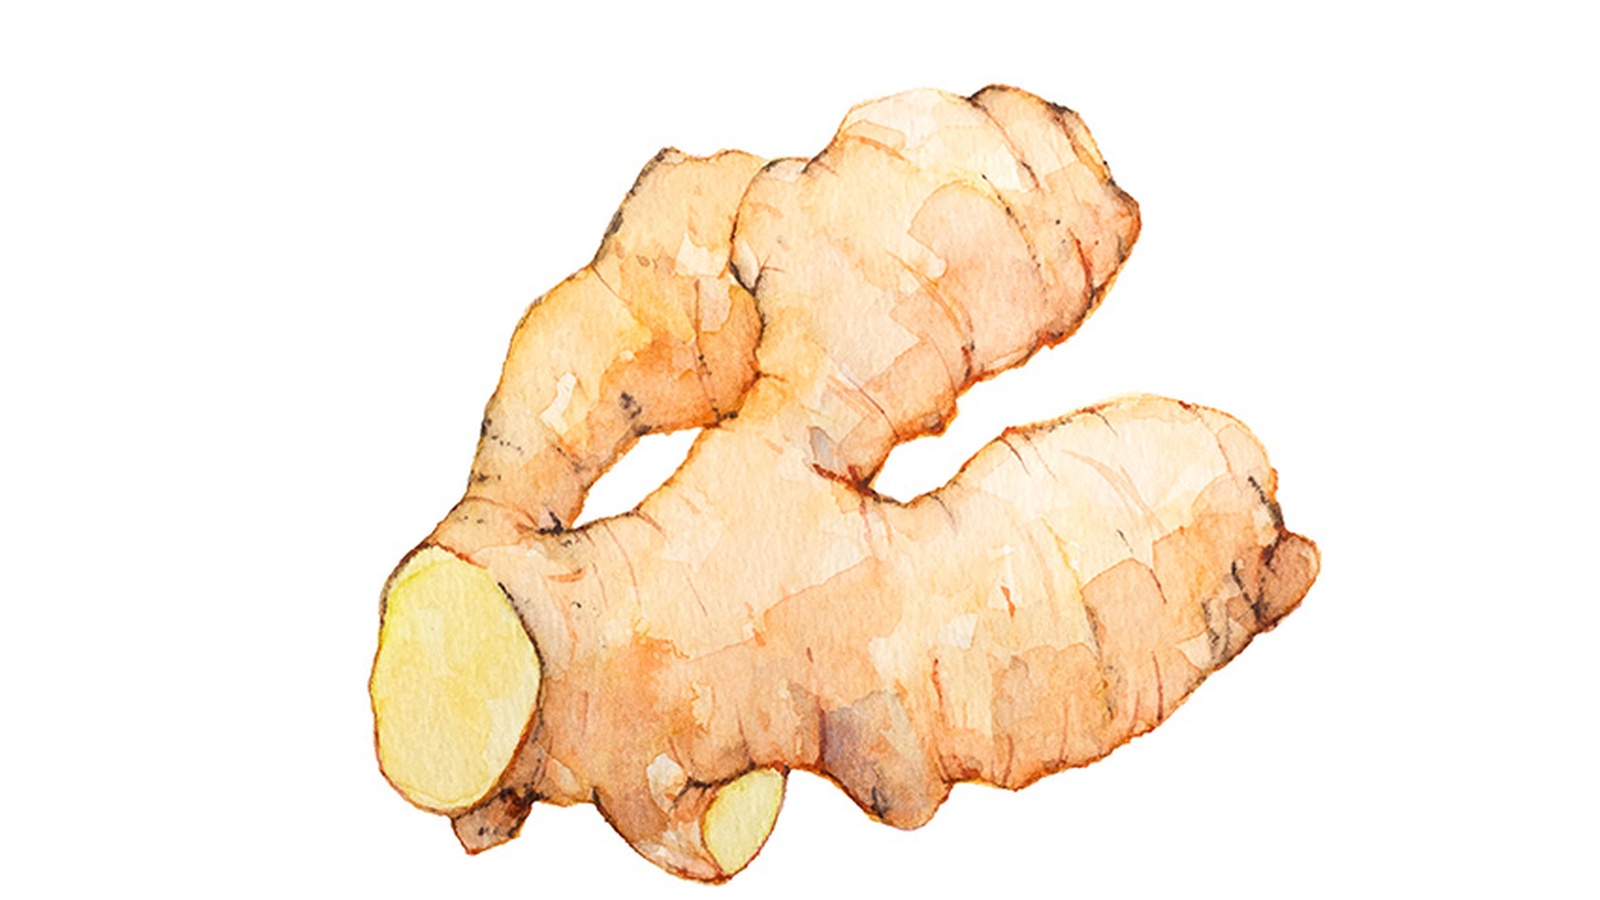 Health Benefits of Ginger + 3 Simple Ways to Use It